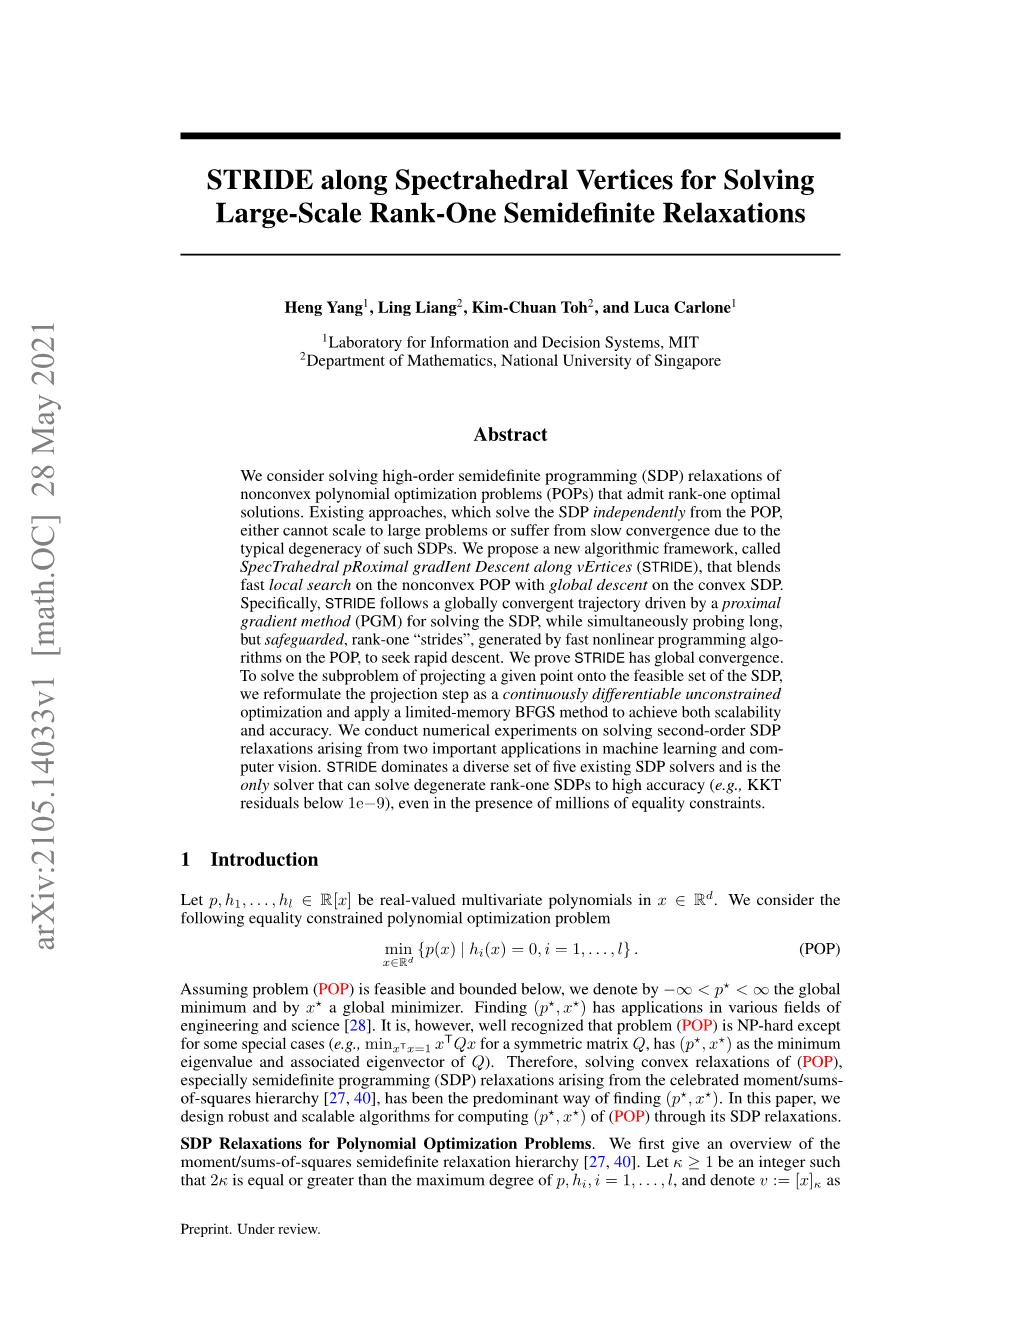 STRIDE Along Spectrahedral Vertices for Solving Large-Scale Rank-One Semidefinite Relaxations